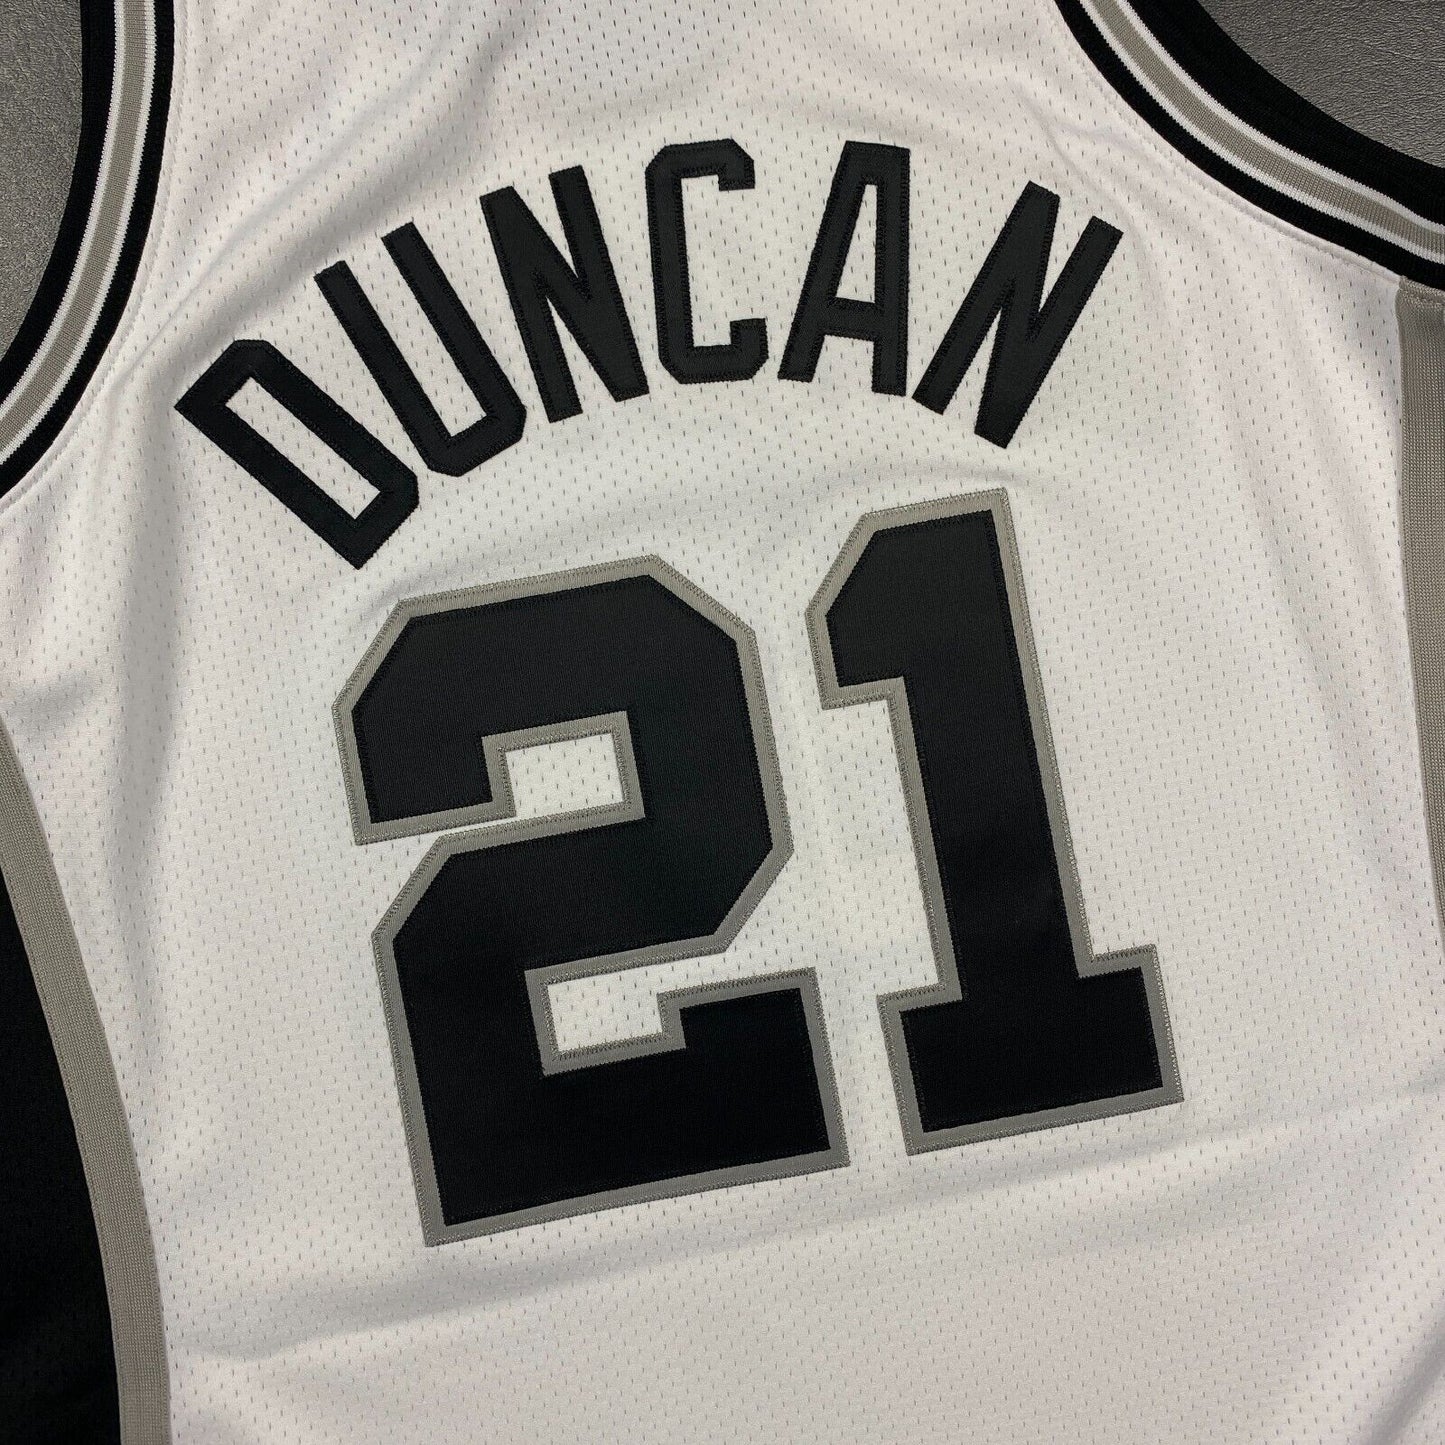 100% Authentic Tim Duncan Mitchell Ness 98 99 NBA Finals Jersey Size 44 L Mens